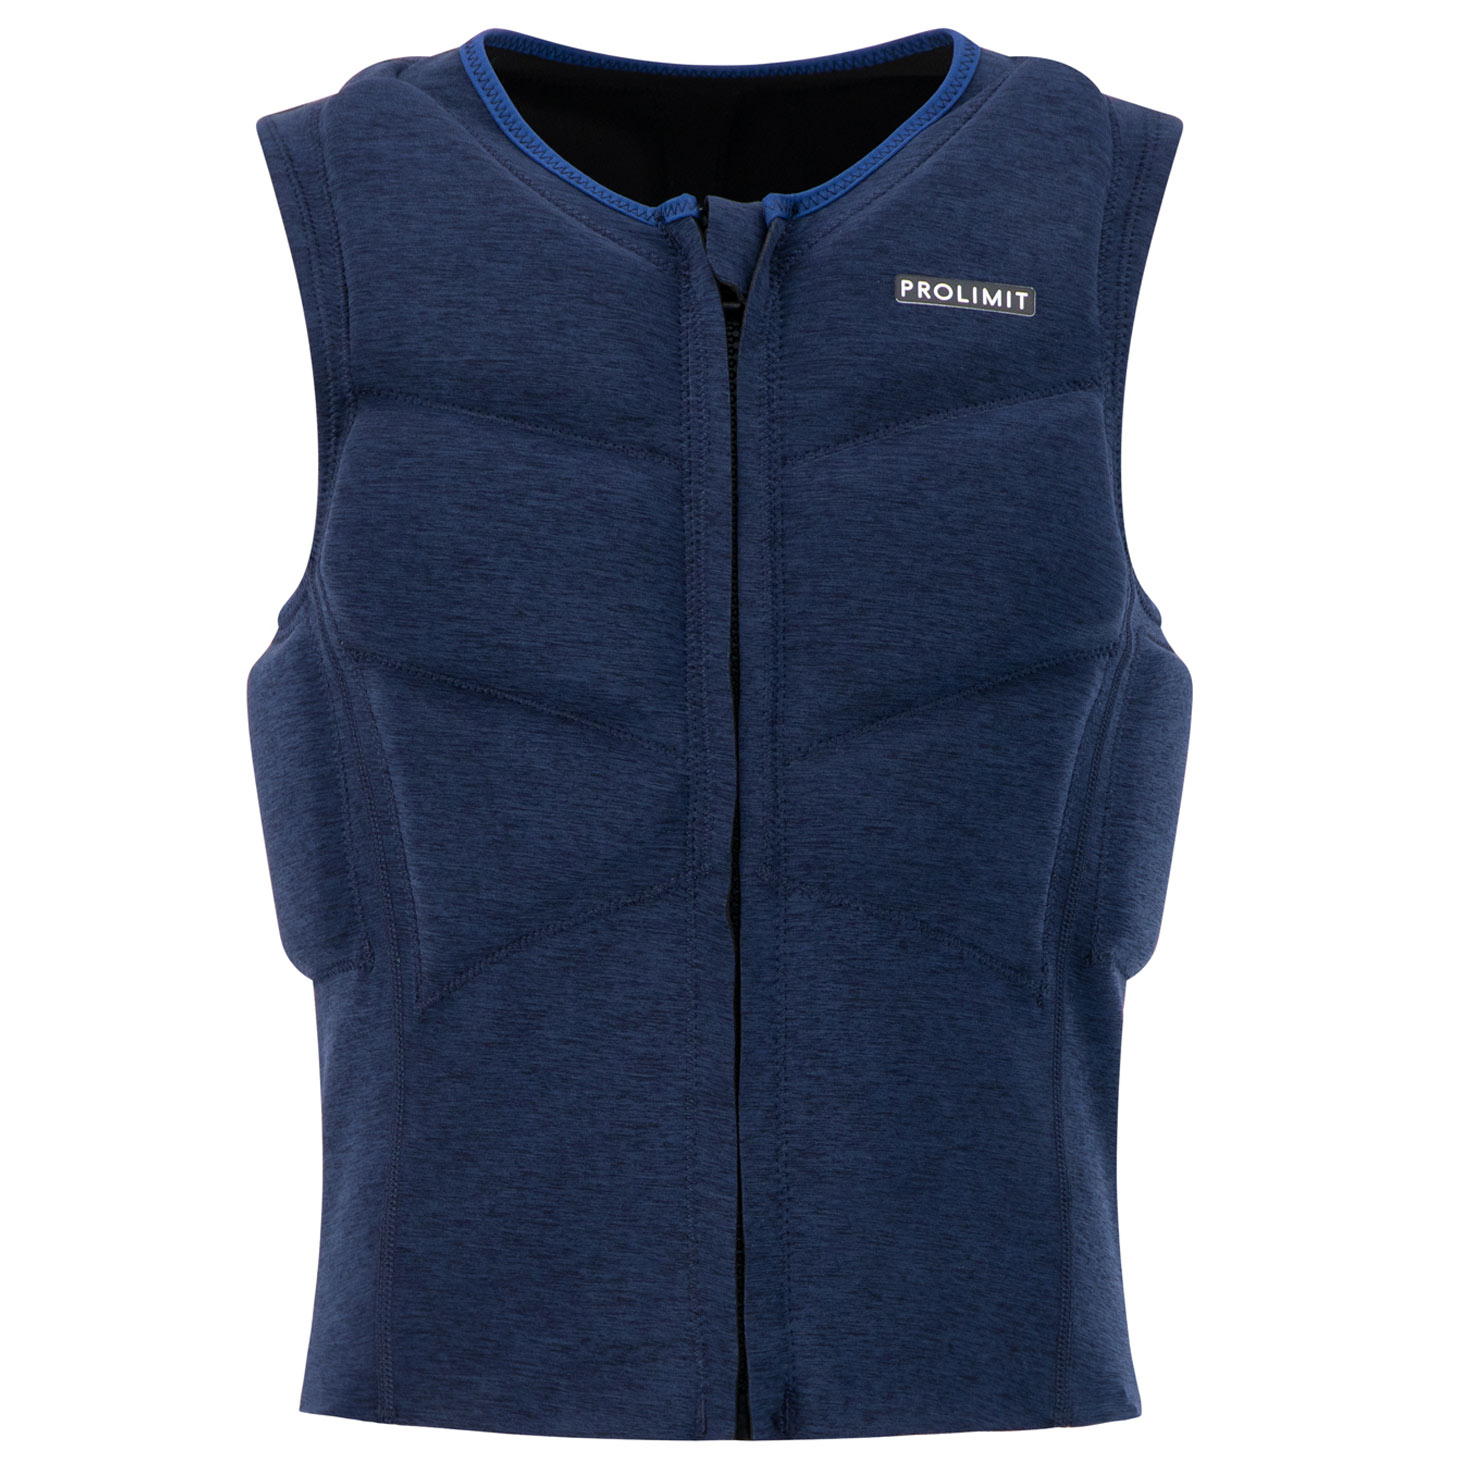 Swim Vests  Help Tots Get Comfy in Water with Kids Swim Vests  Wahu  Official Store